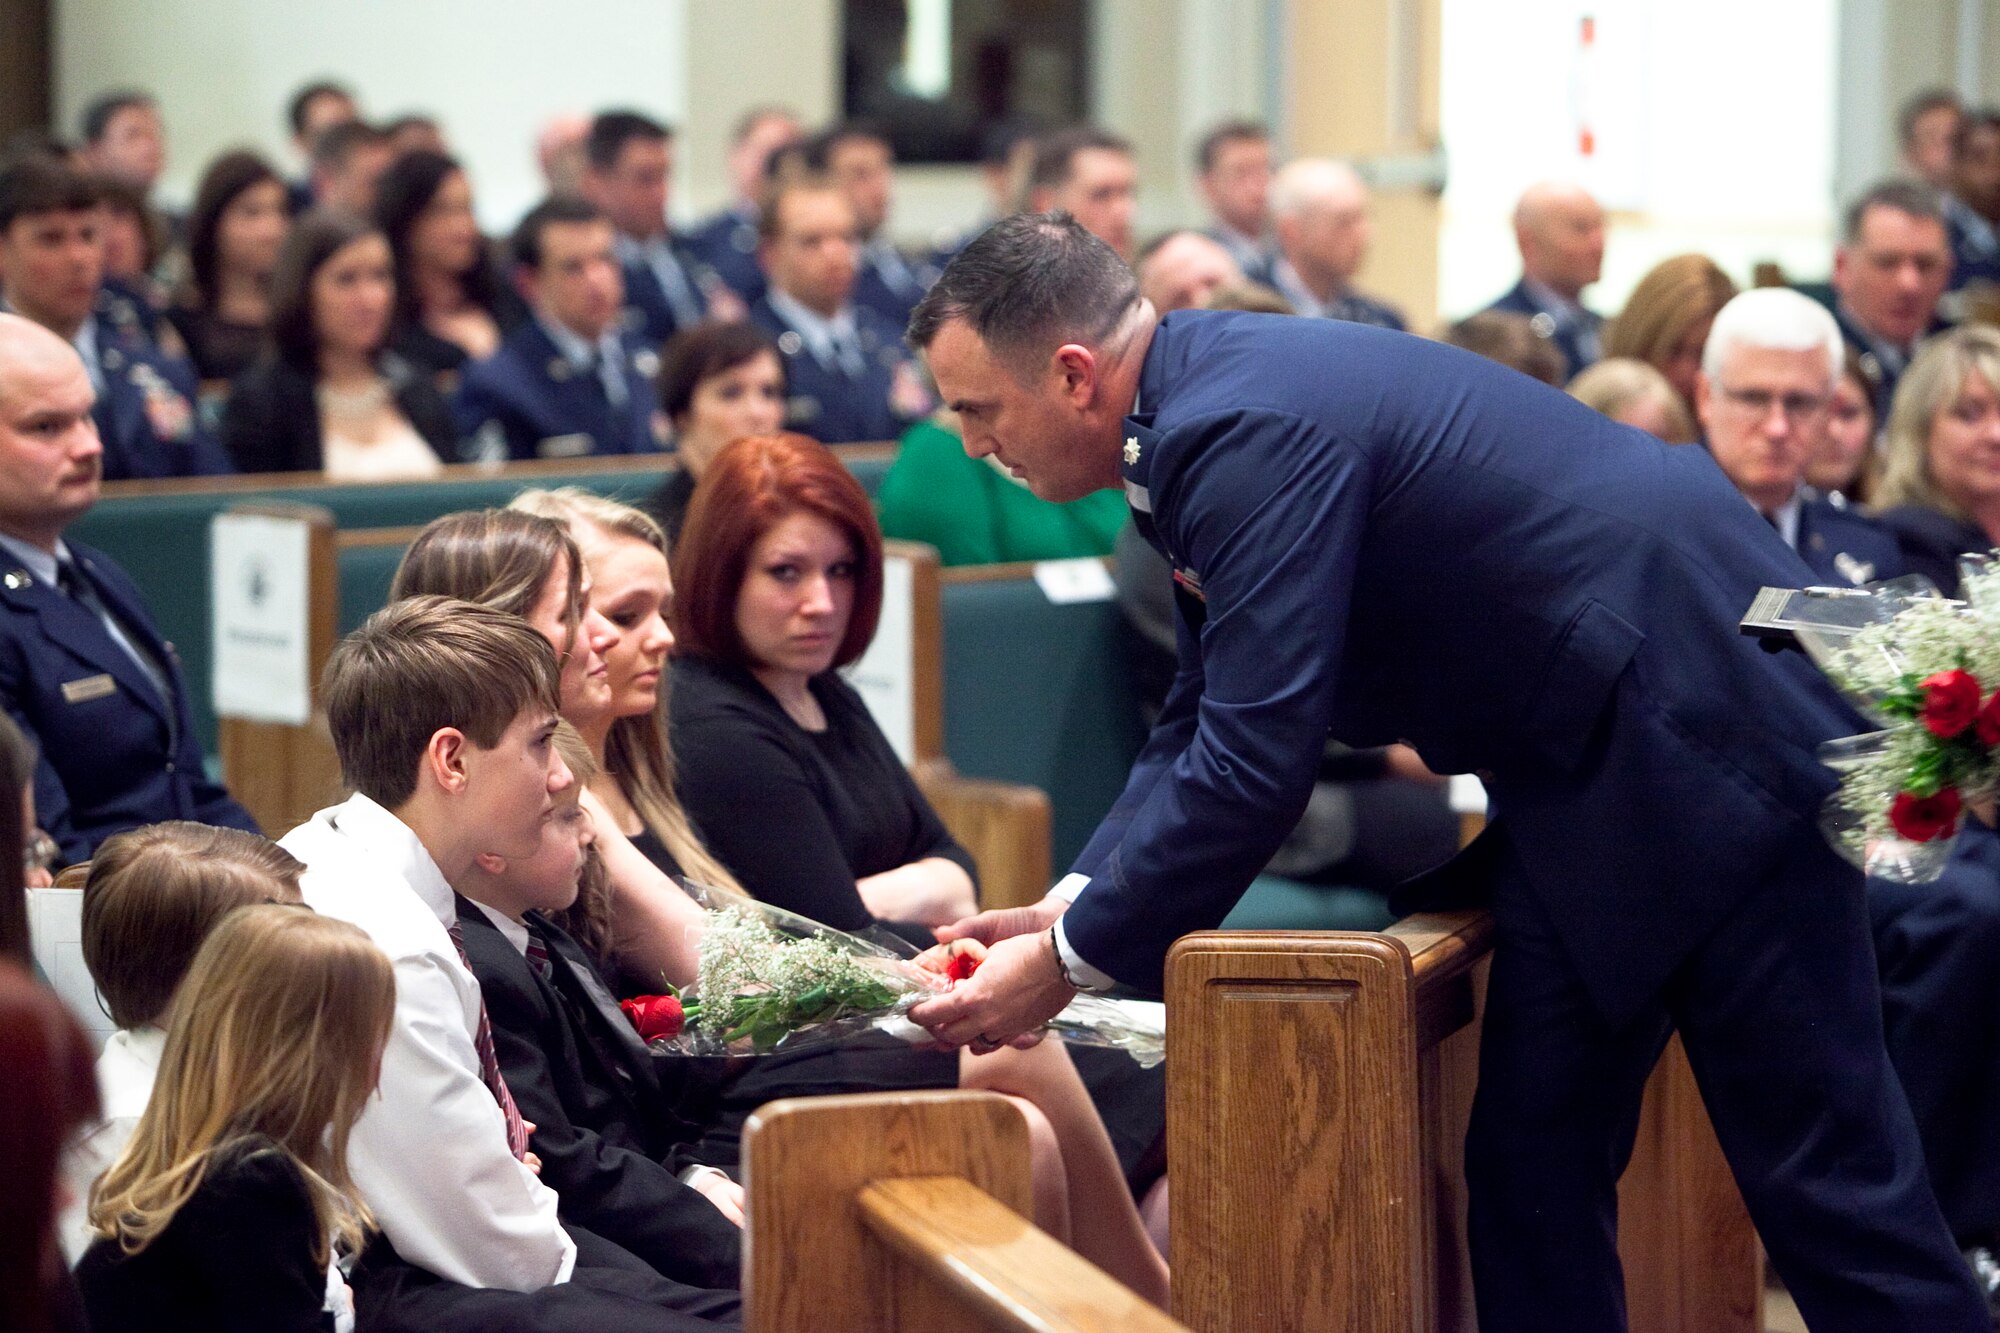 Alyssa Gavulic accepts a rose during the memorial service for her husband, Master Sgt. Josh Gavulic, at the Main Post Chapel at Fort Benning, Ga., on February 28, 2014. (U.S. Army Photo by Patrick Albright/MCoE Photographer)
